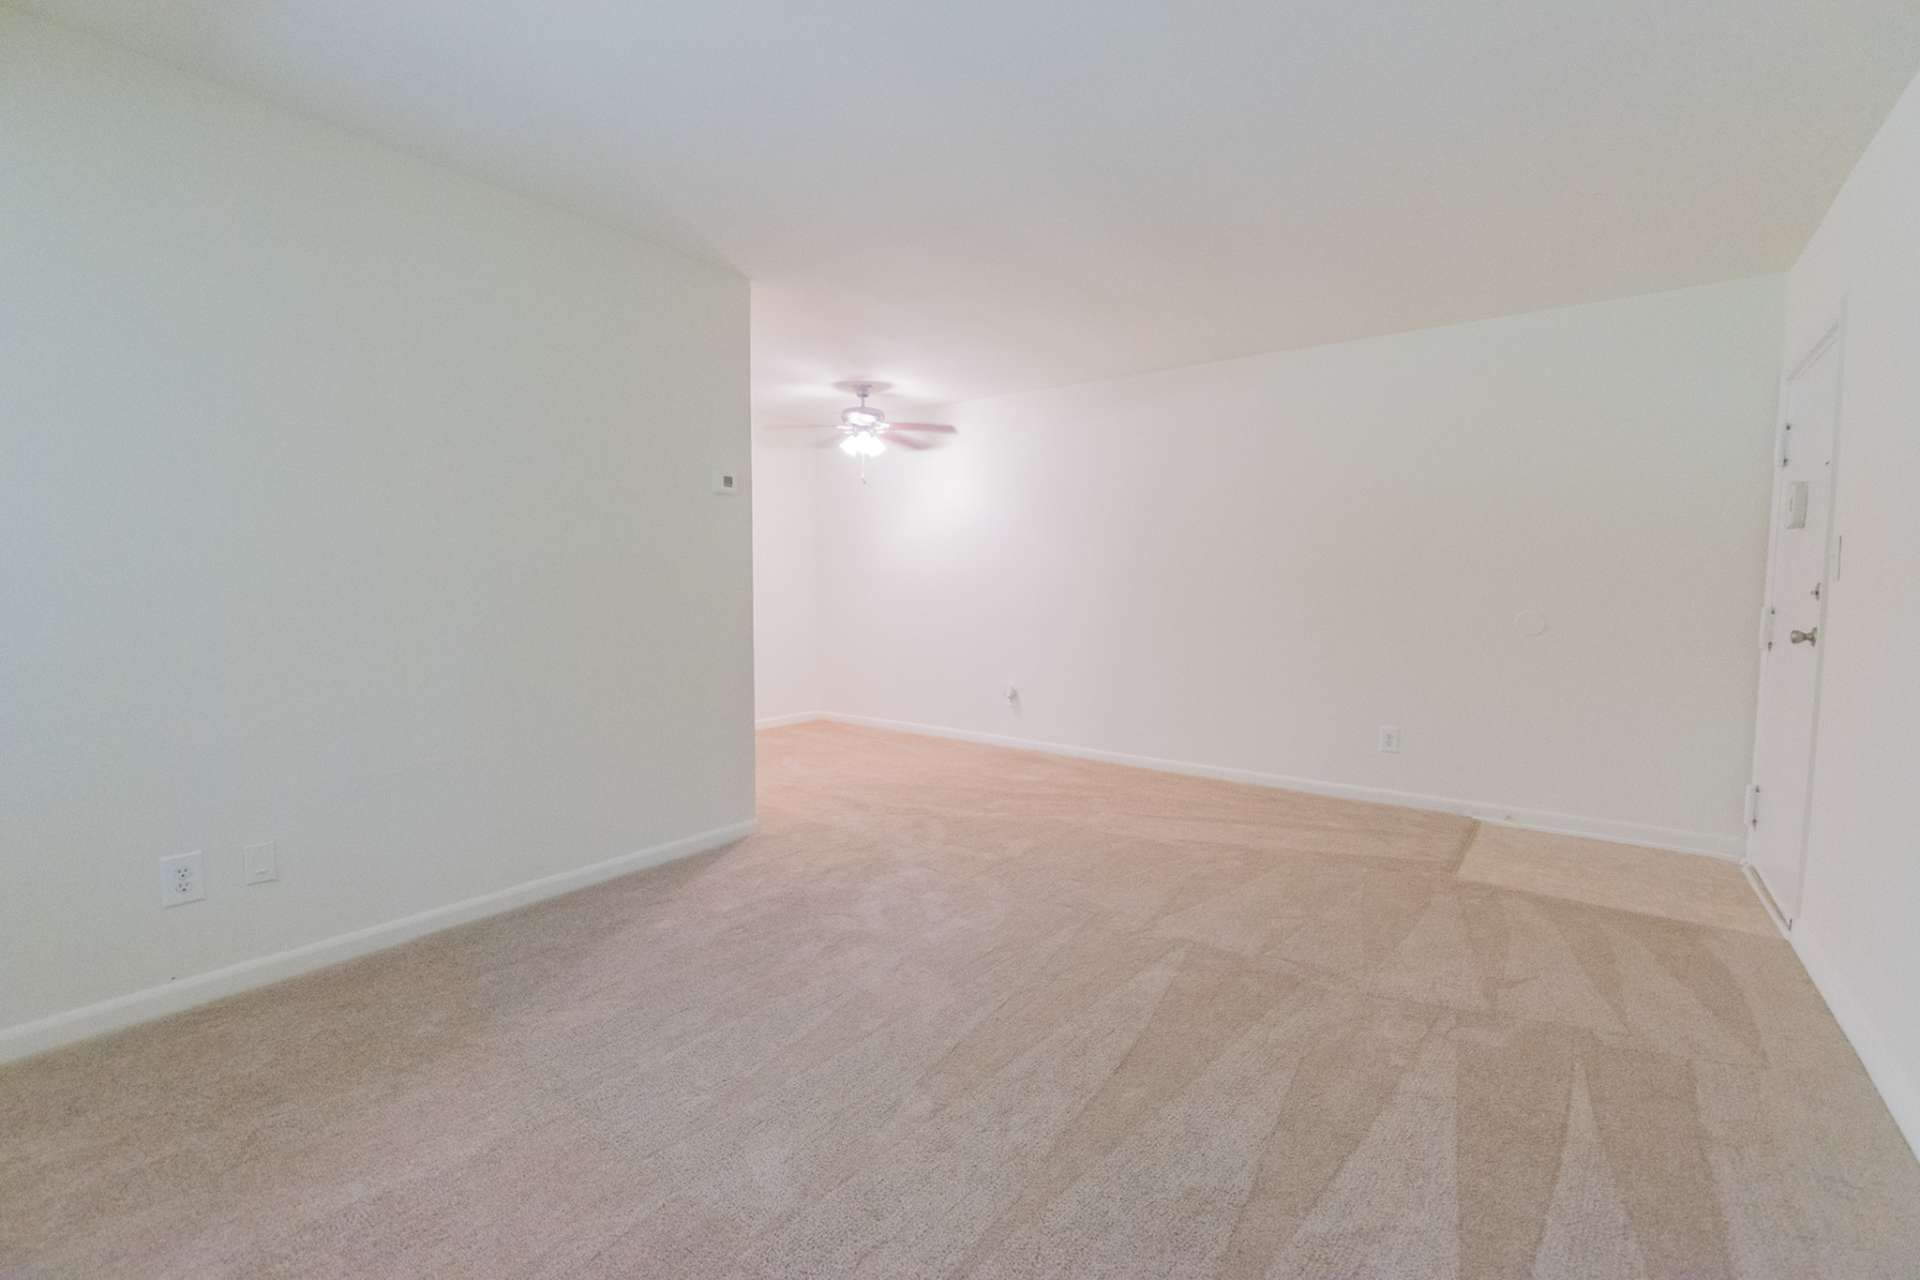 Living room area of an apartment unfurnished, fitted with carpet flooring, a ceiling fan, and a high ceiling